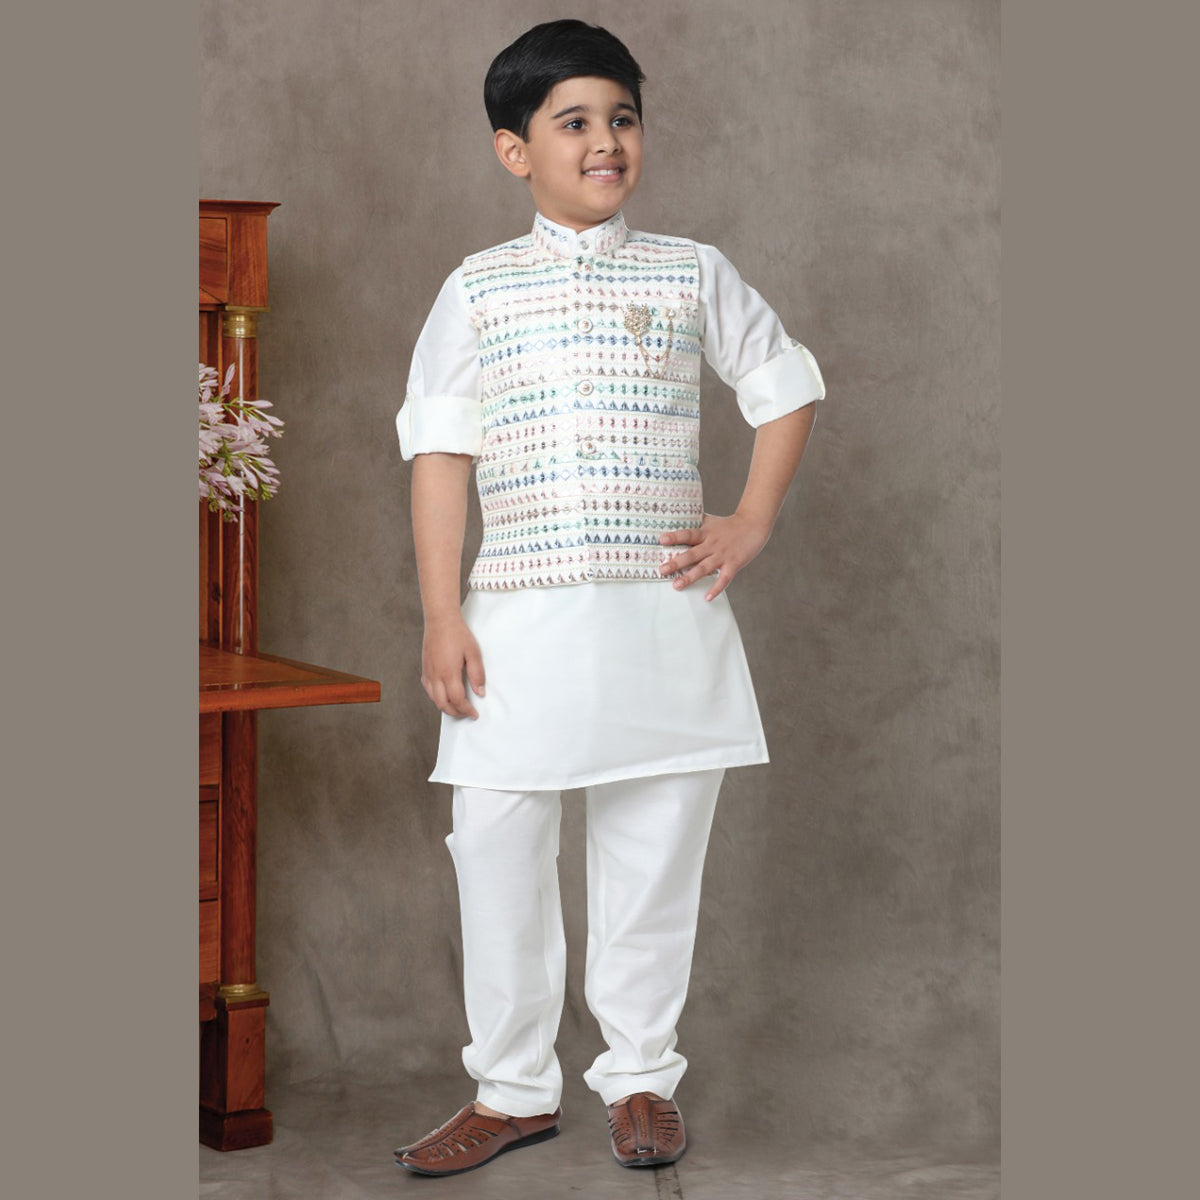 Boys Clothing & Buy Baby Boy Dress Clothes Stylish At Best Prices In India